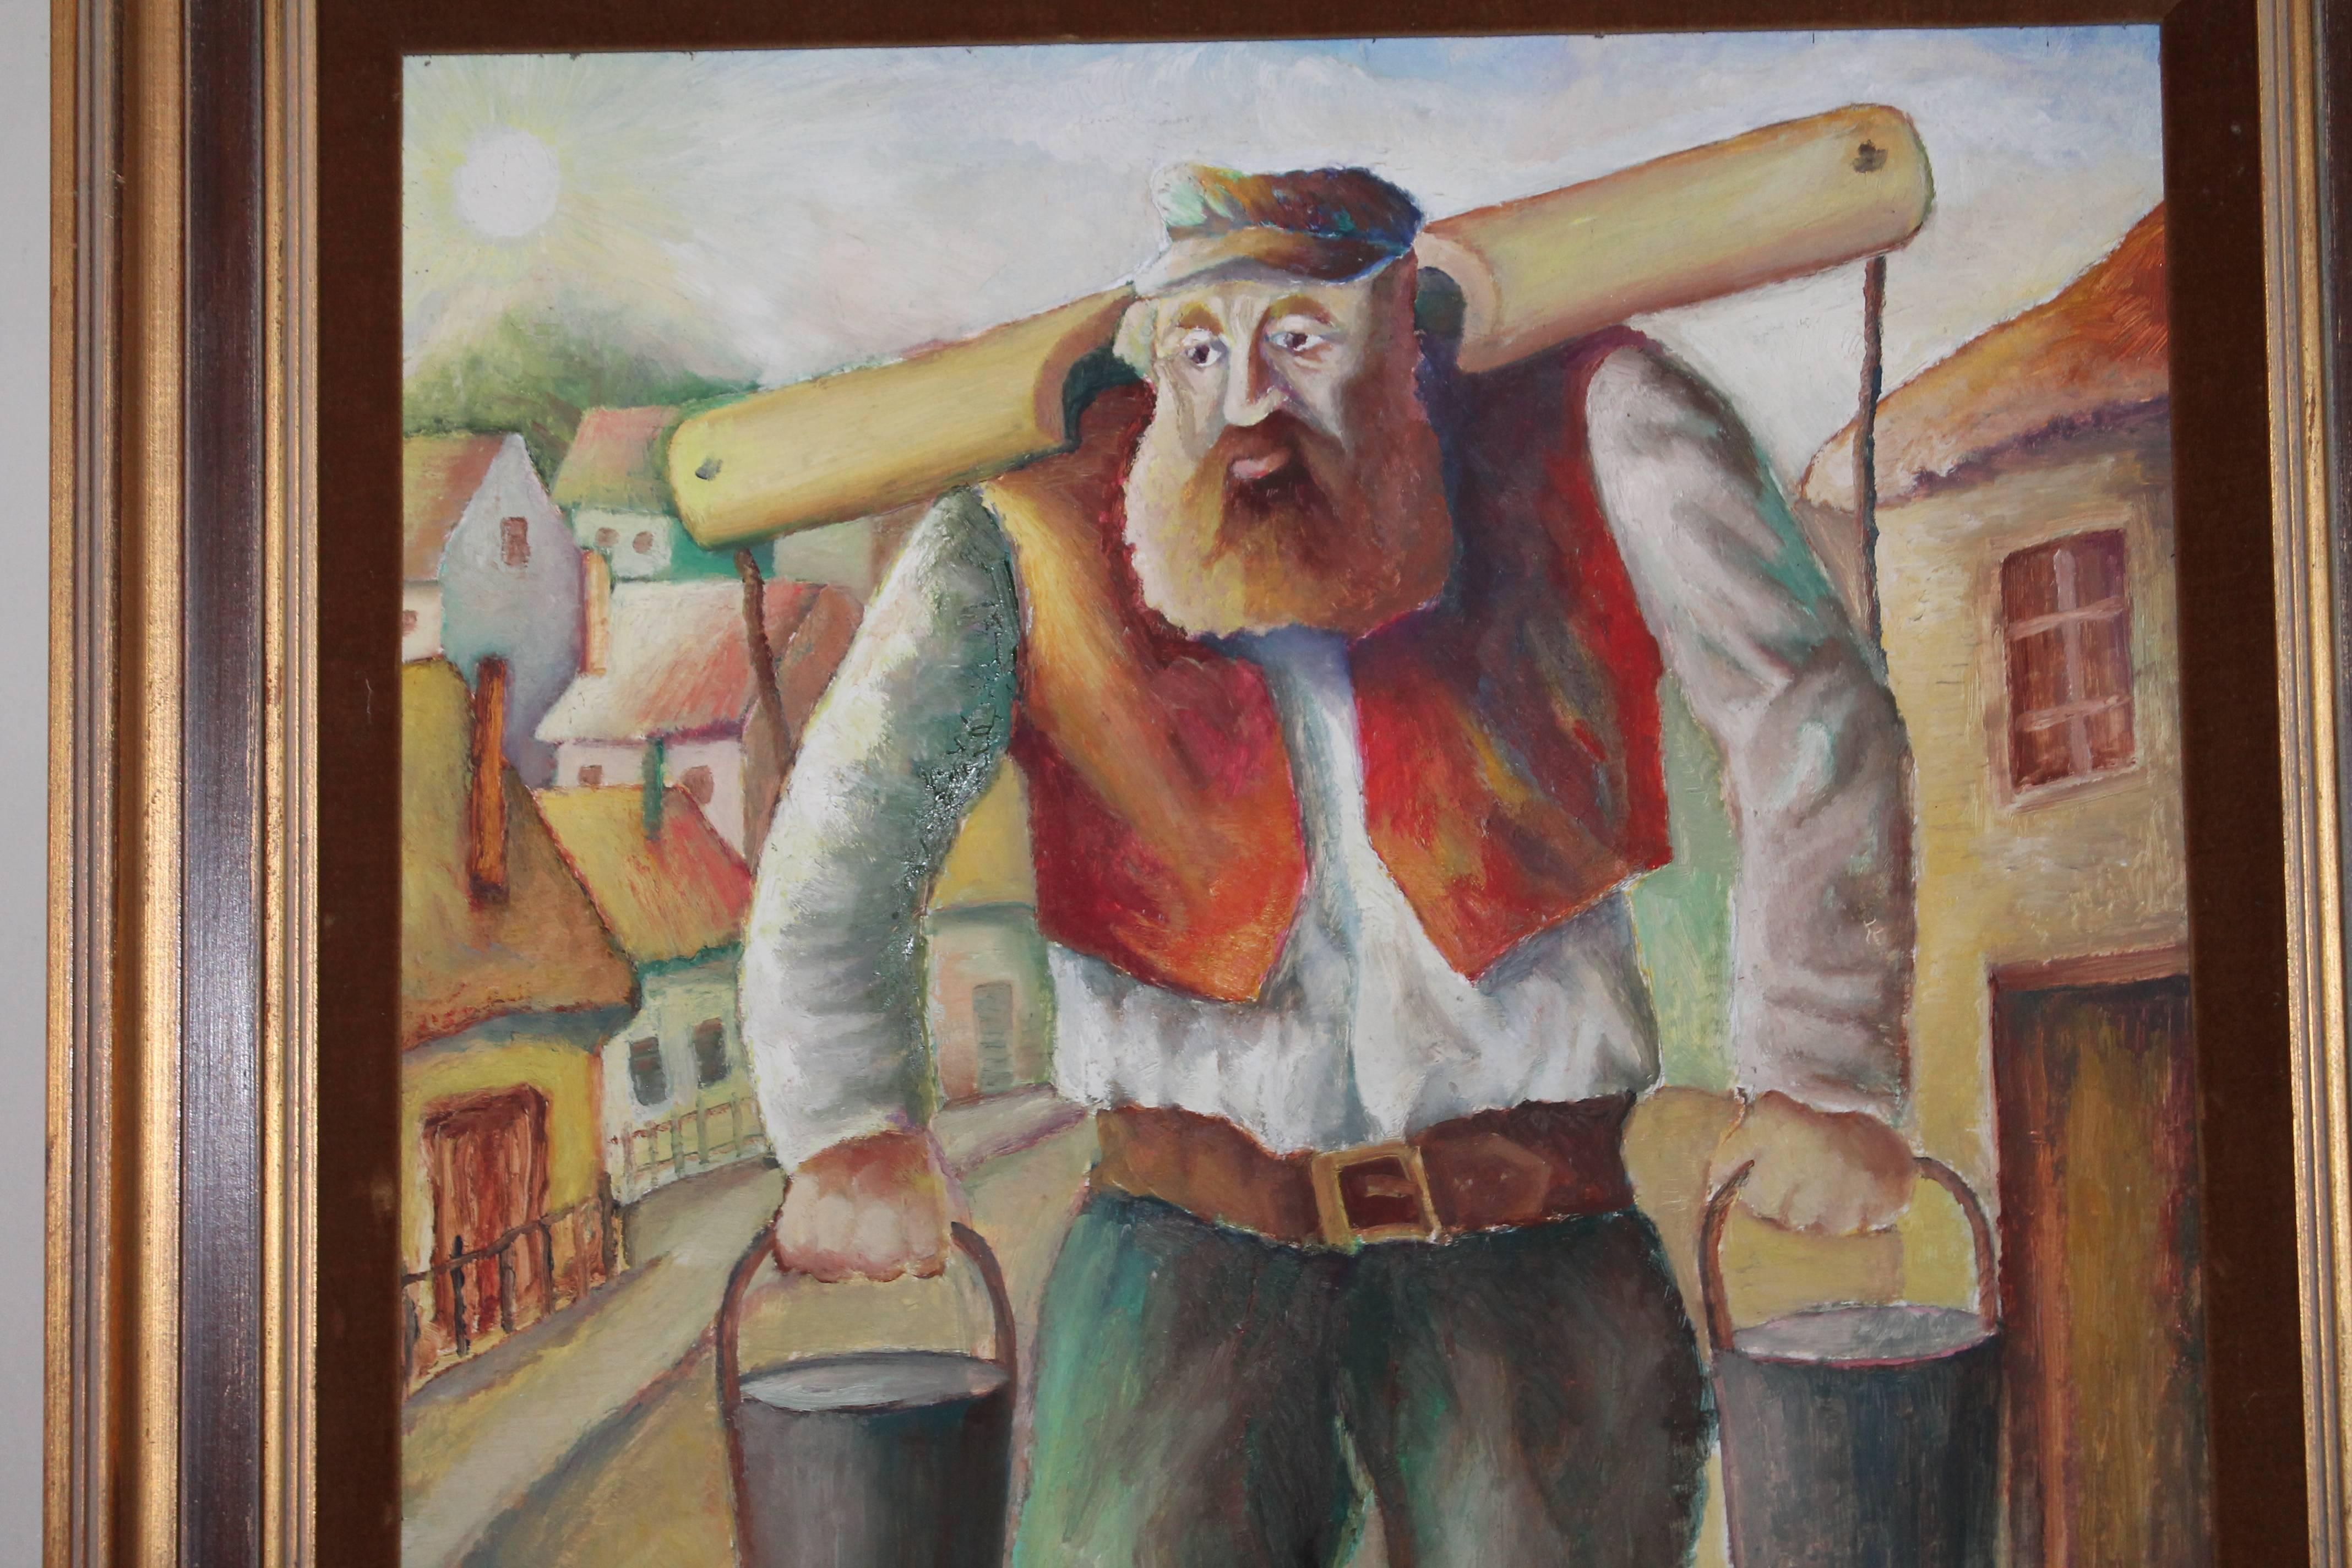 Amazing painting of Judaic farmer fetching water. This painting is signed and dated. This item has minor wear consistent with its age. Painting is signed S. Brunstein and dated 1974. The condition is good.